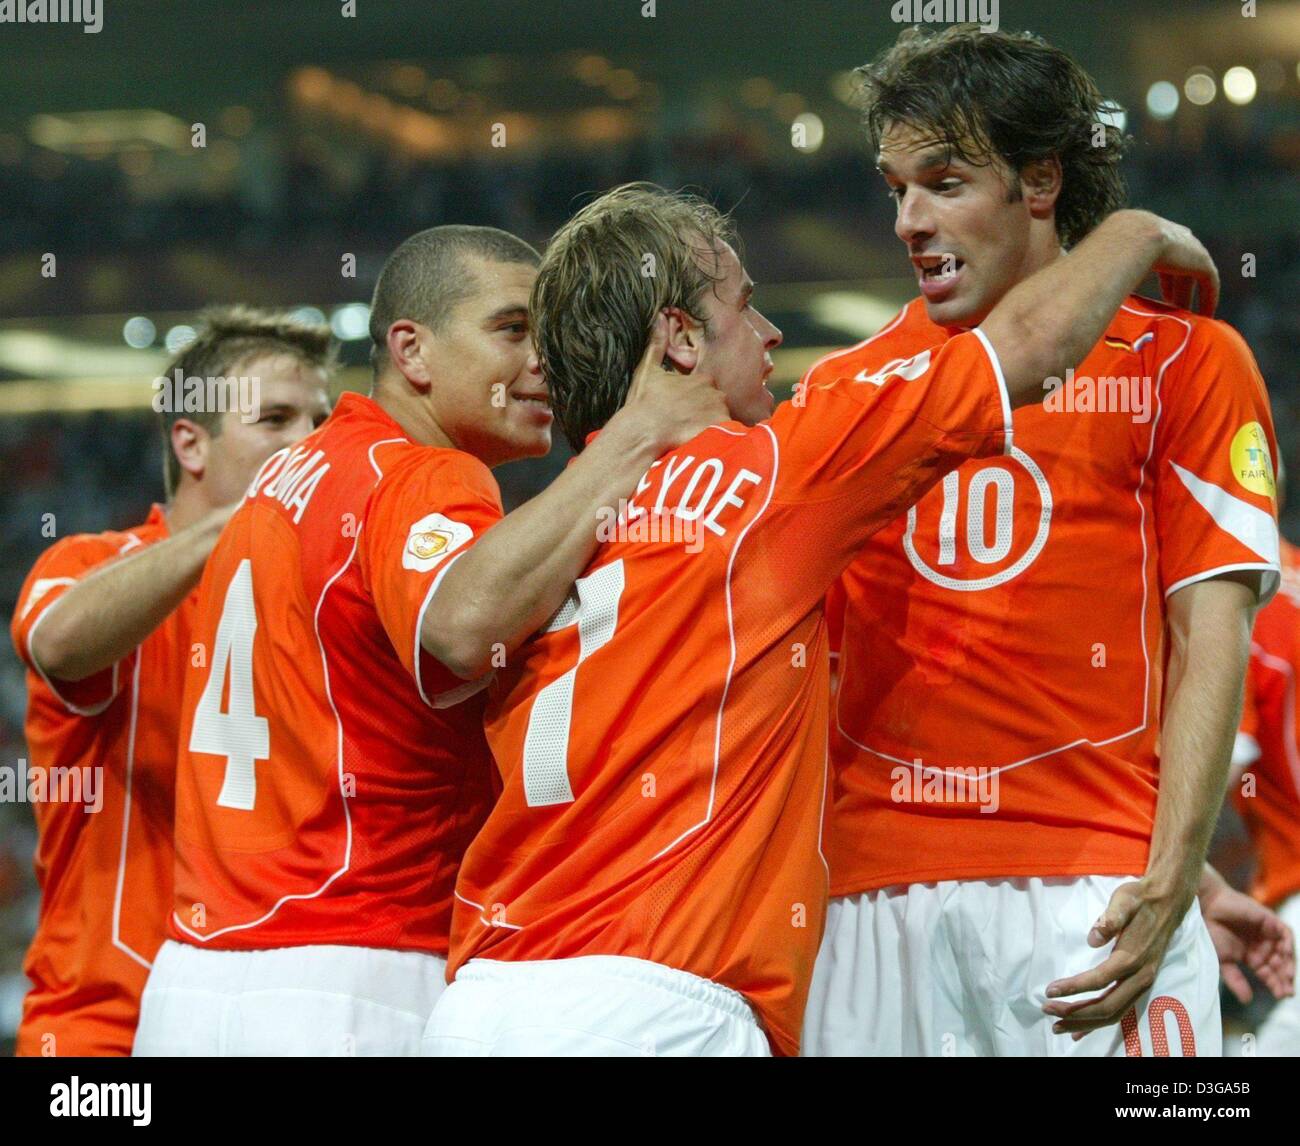 (dpa) - Dutch forward Ruud van Nistelrooy (R), who had scored the 1-1 equalizer moments earlier, celebrates with his teammates (L-R) Rafael van der Vaart, Wilfried Bouma und Andy van der Meyde during the Soccer Euro 2004 group D game between Germany and the Netherlands at the Dragao Stadium in Porto, Portugal, 15 June 2004. The game ended in a 1-1 draw. +++NO MOBILE APPLICATIONS ++ Stock Photo